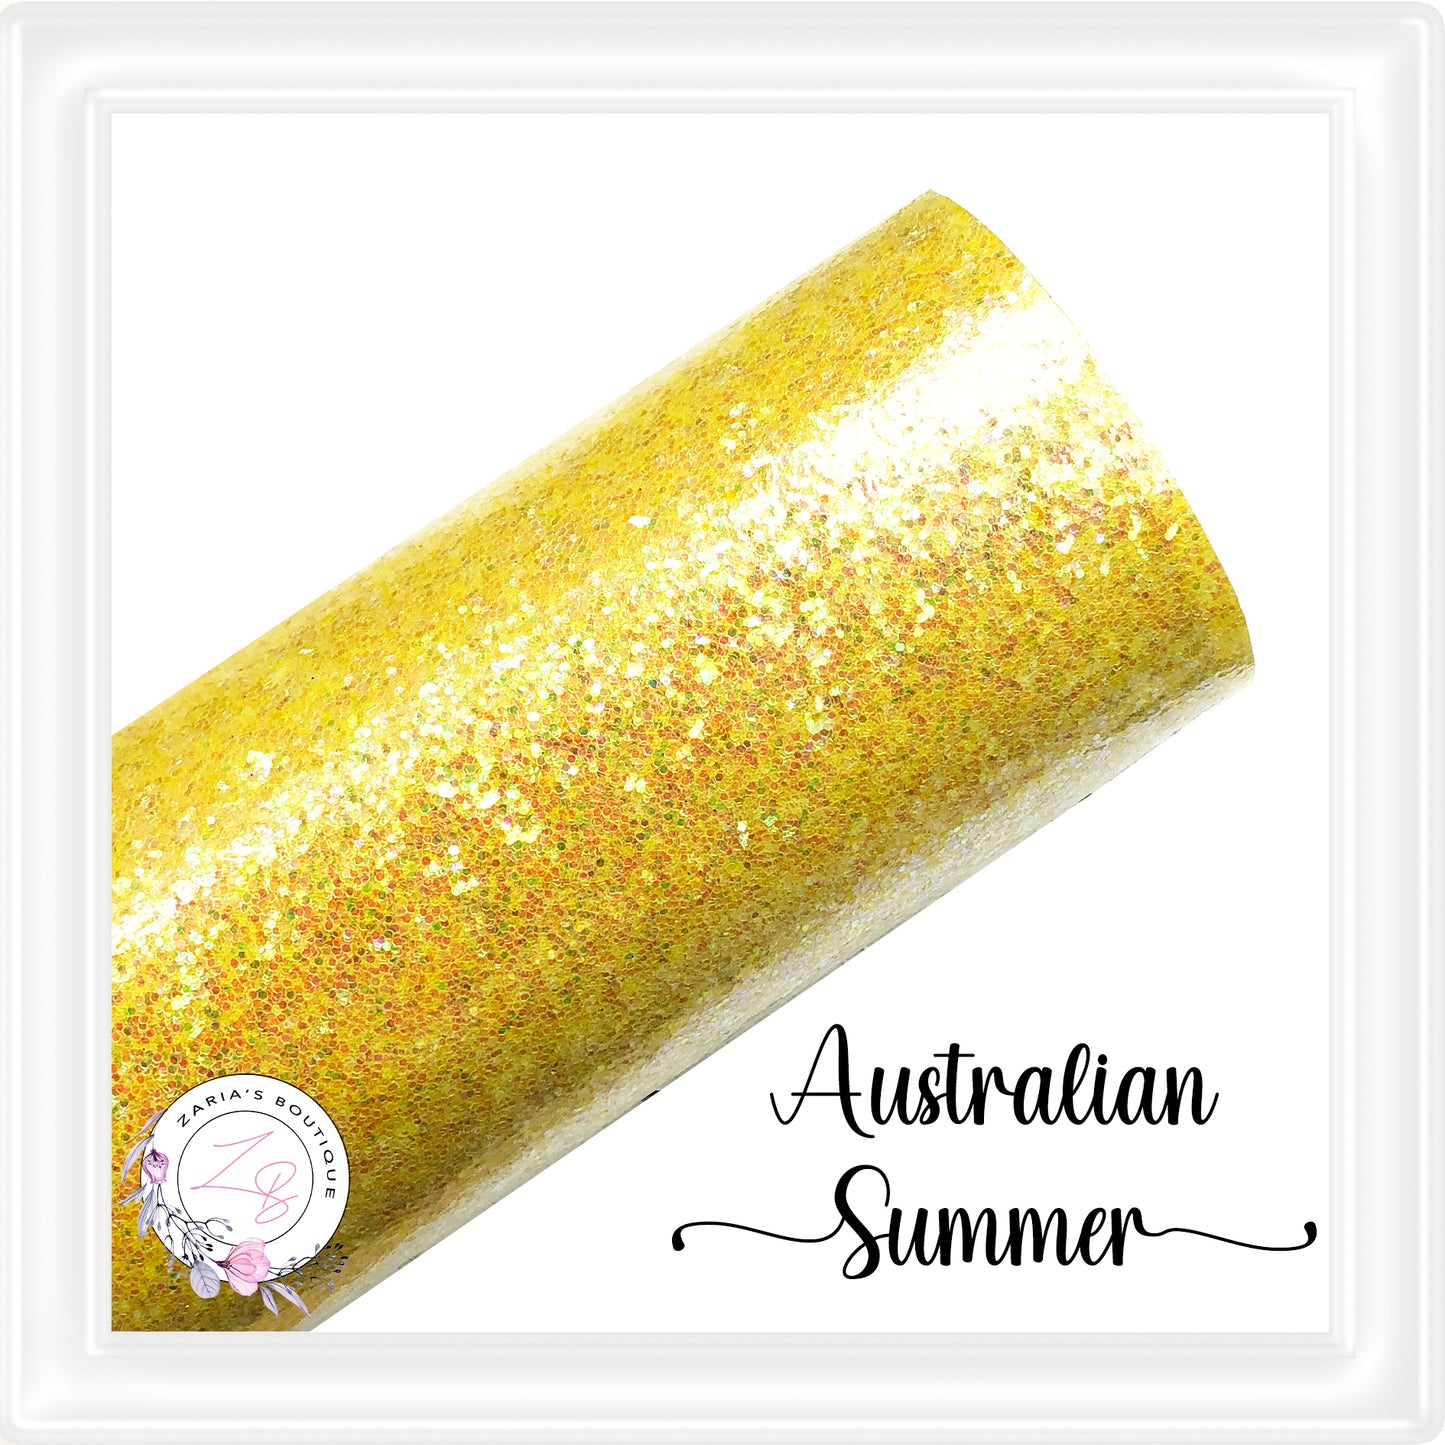 ⋅ Australian Summer  ⋅  Smooth Yellow Glitter Faux Leather ⋅